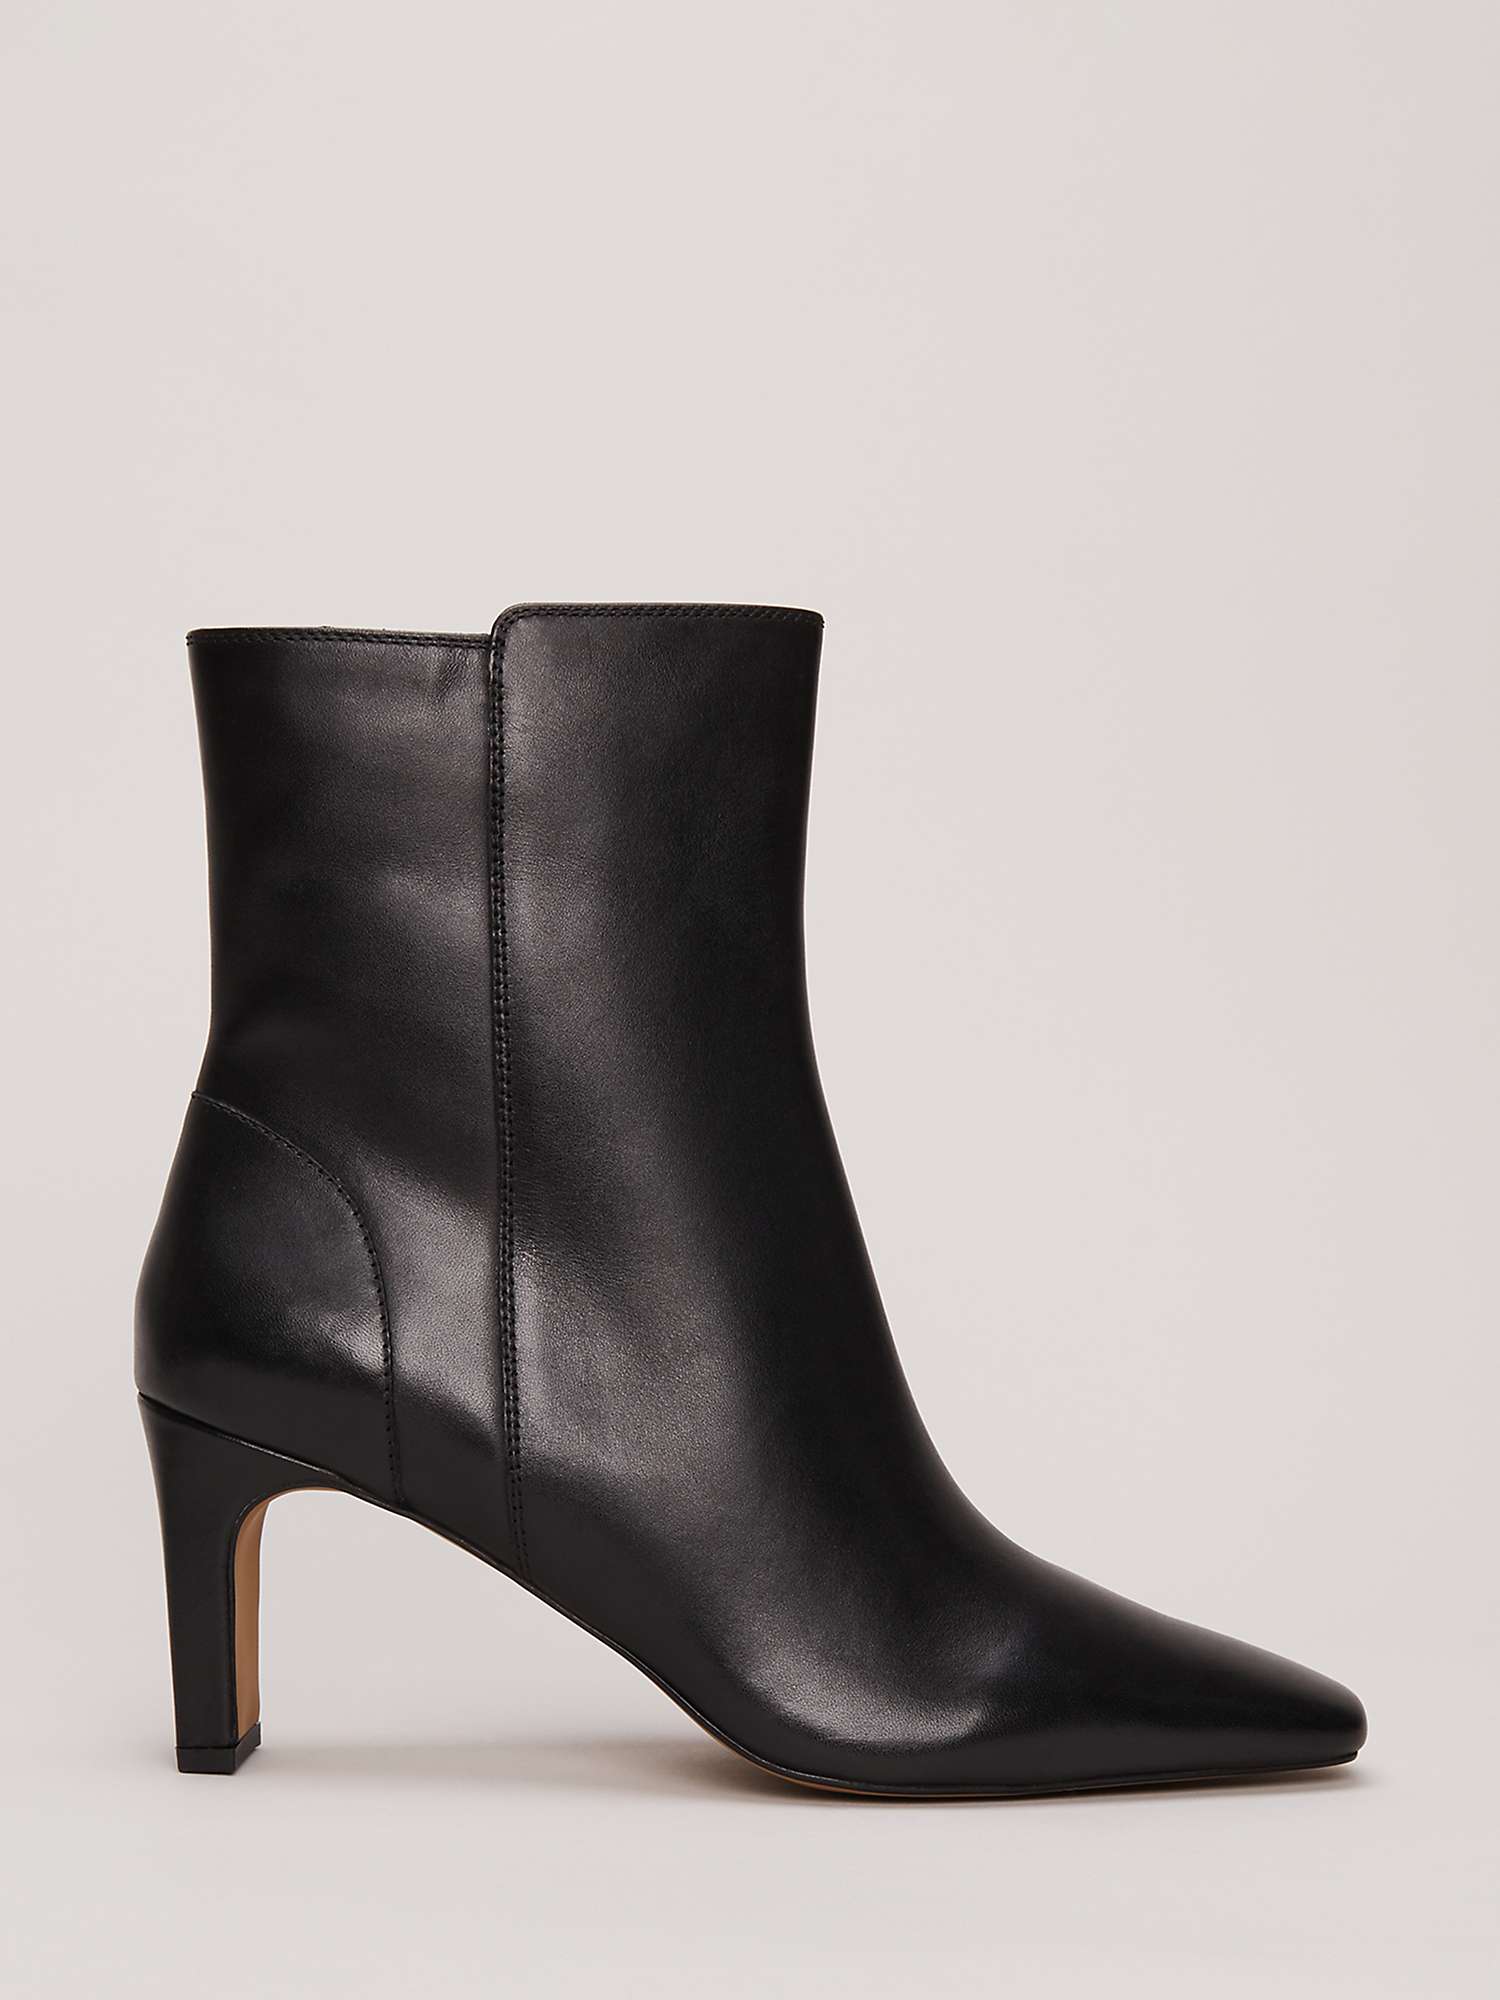 Phase Eight Slim Block Heel Leather Ankle Boots, Black at John Lewis ...